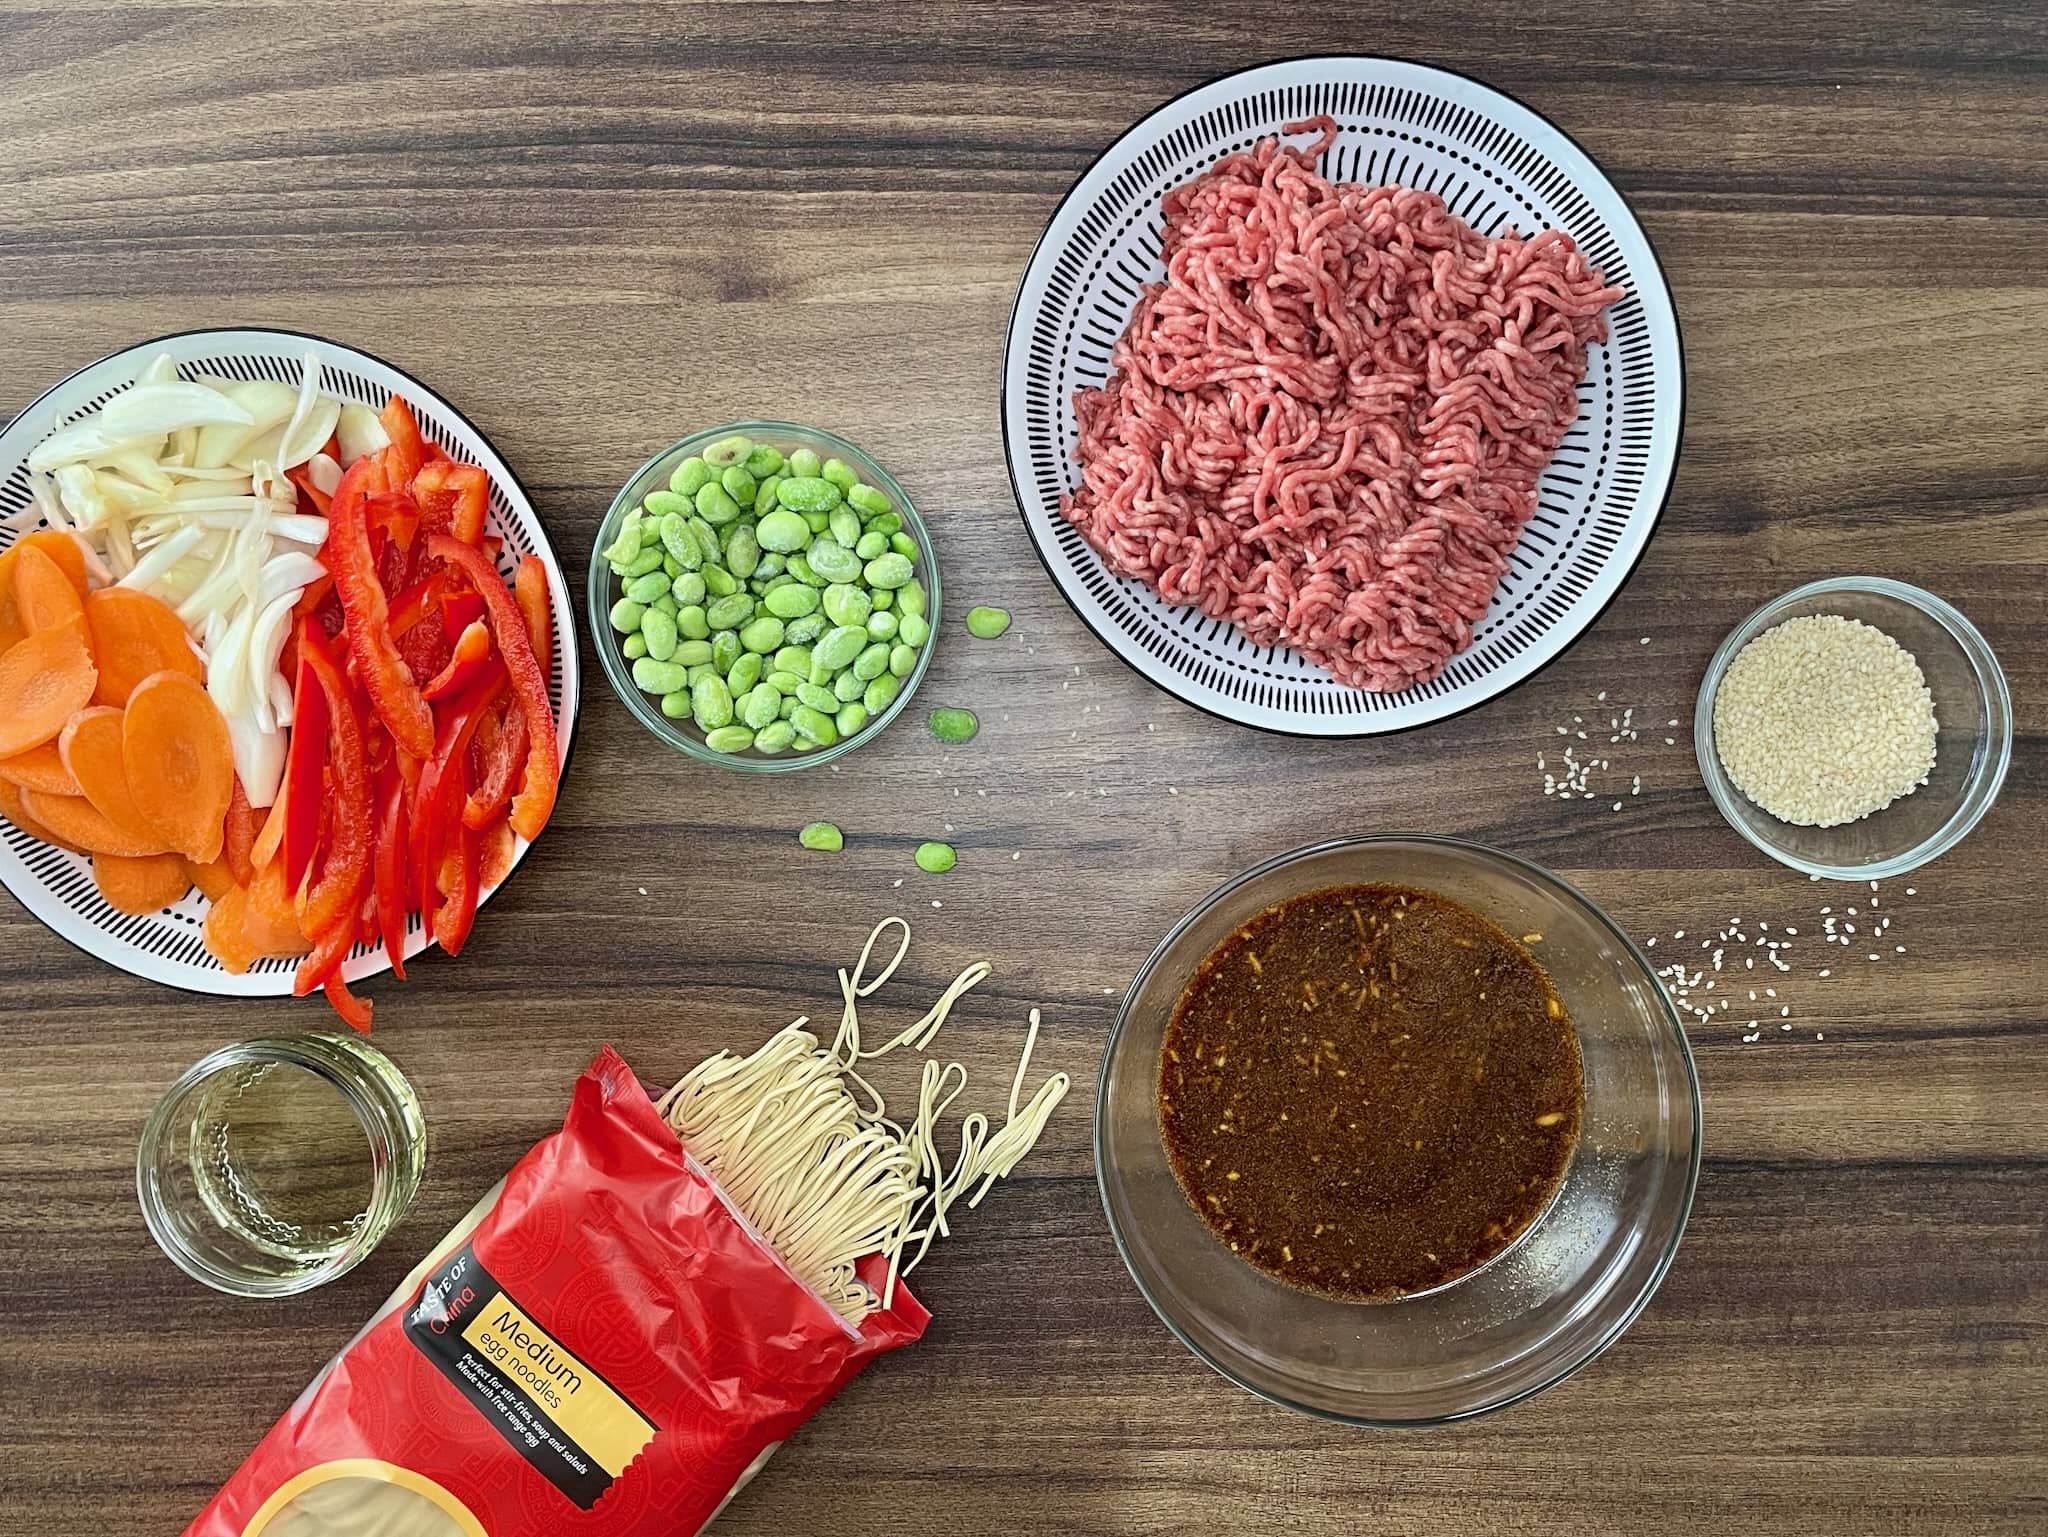 Ground beef stir-fry ingredients are ready to cook